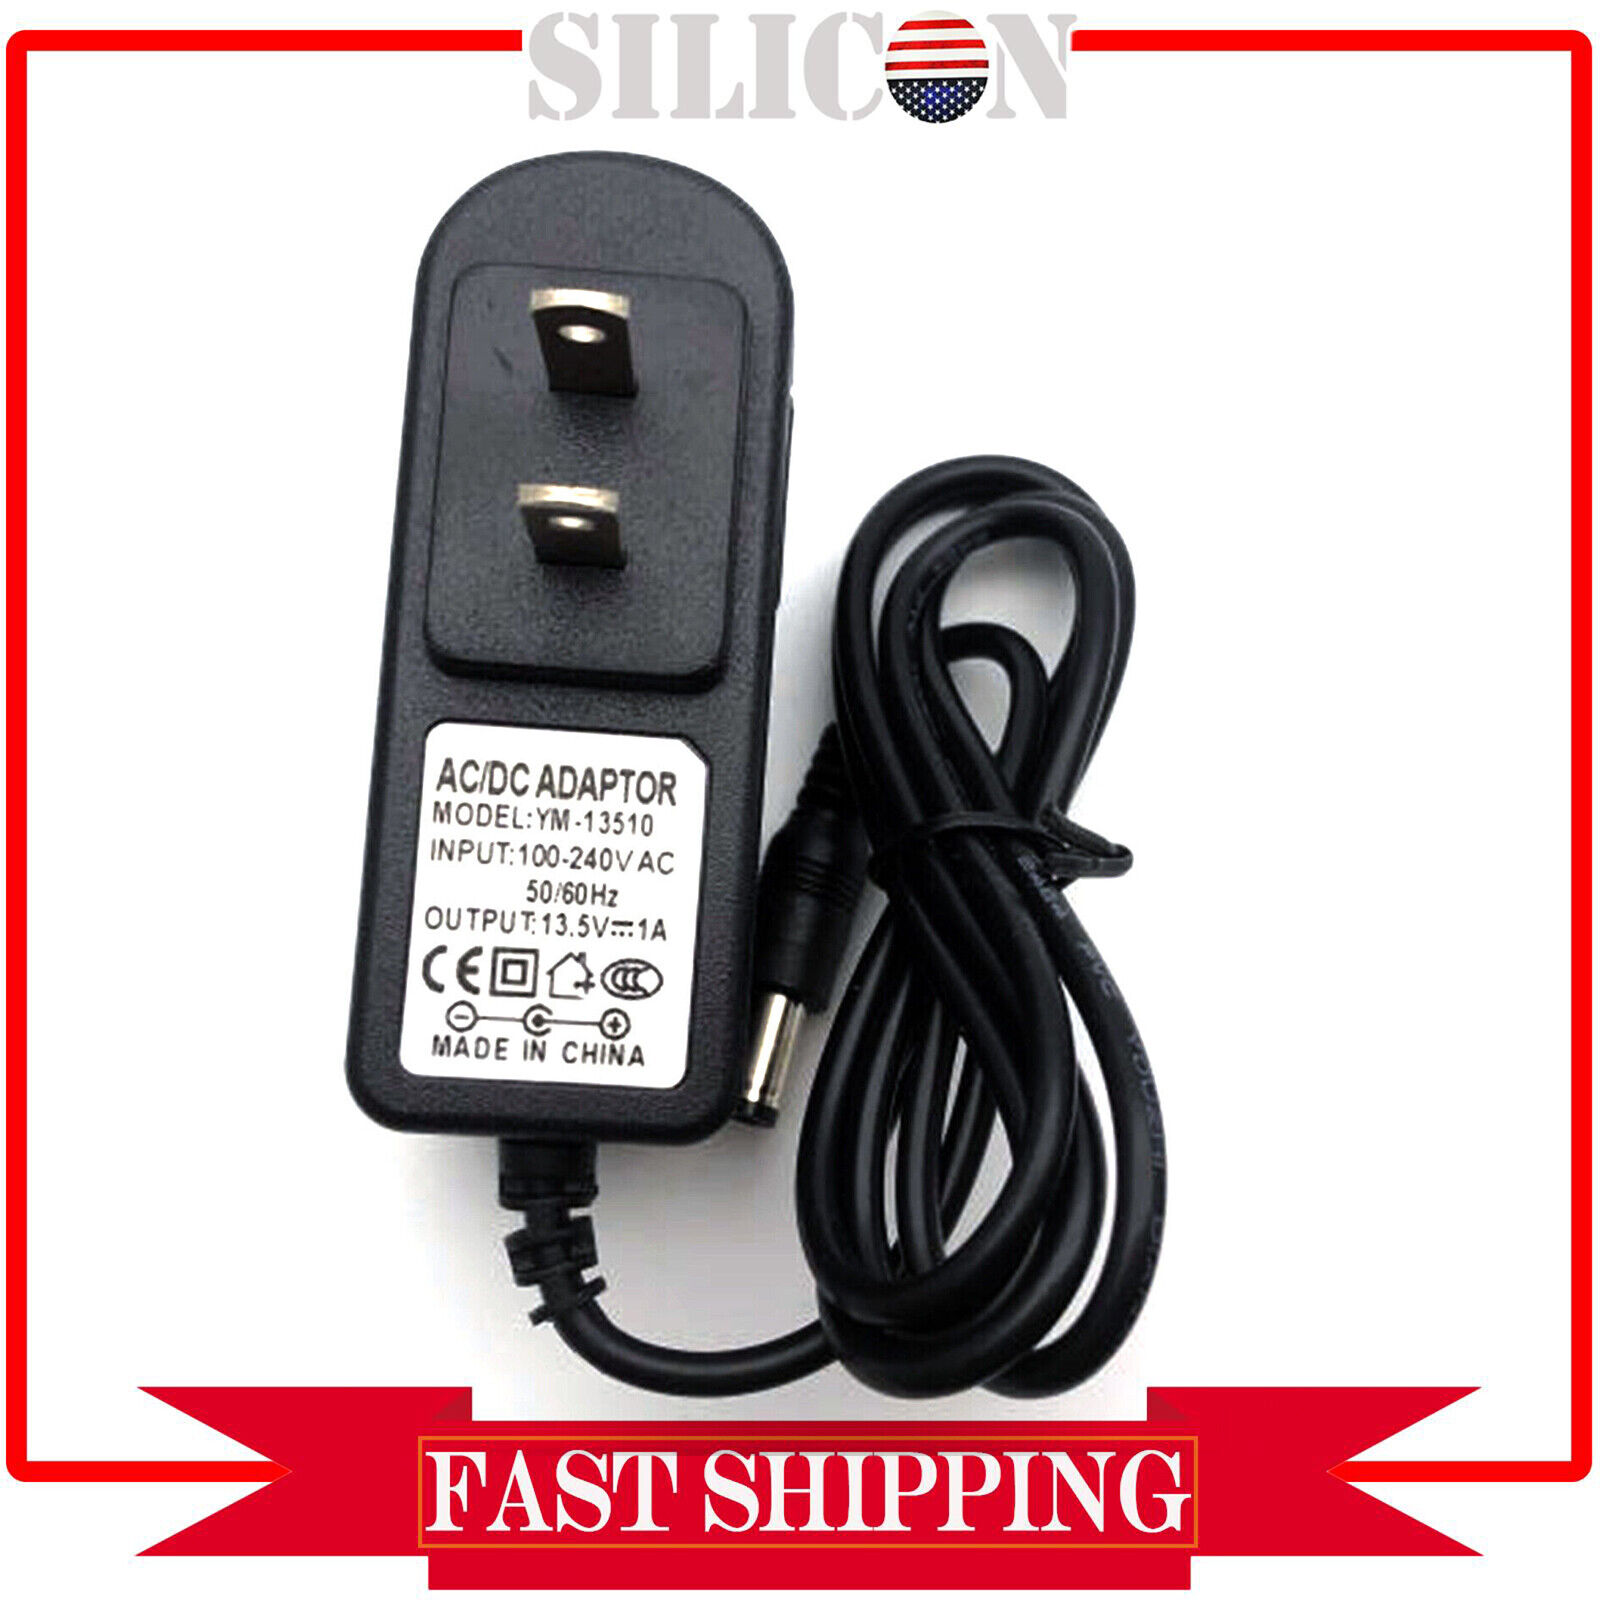 AC 110-240V Converter Adapter DC 13.5V1A Wall Charger Power Supply (5.5*2.5mm)